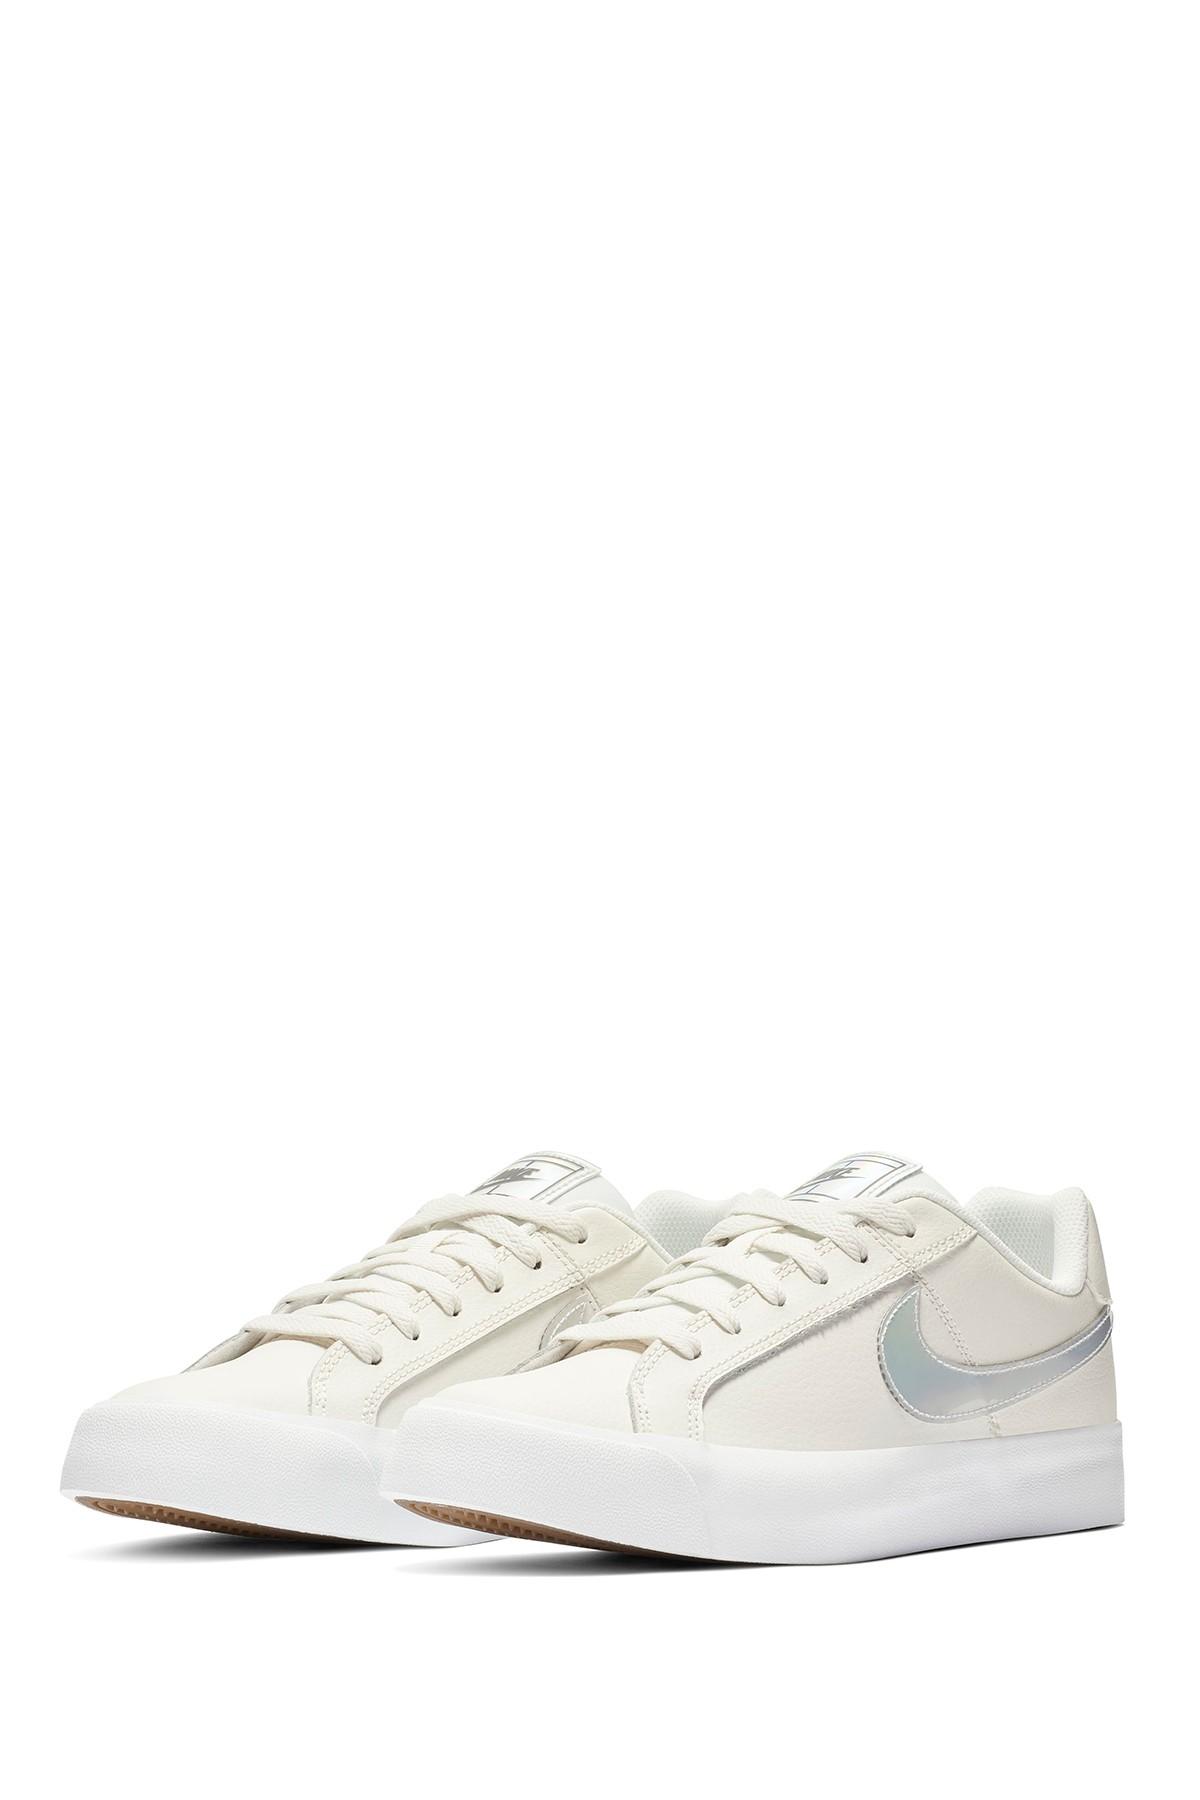 Nike Court Royale Ac Leather Sneaker in White | Lyst